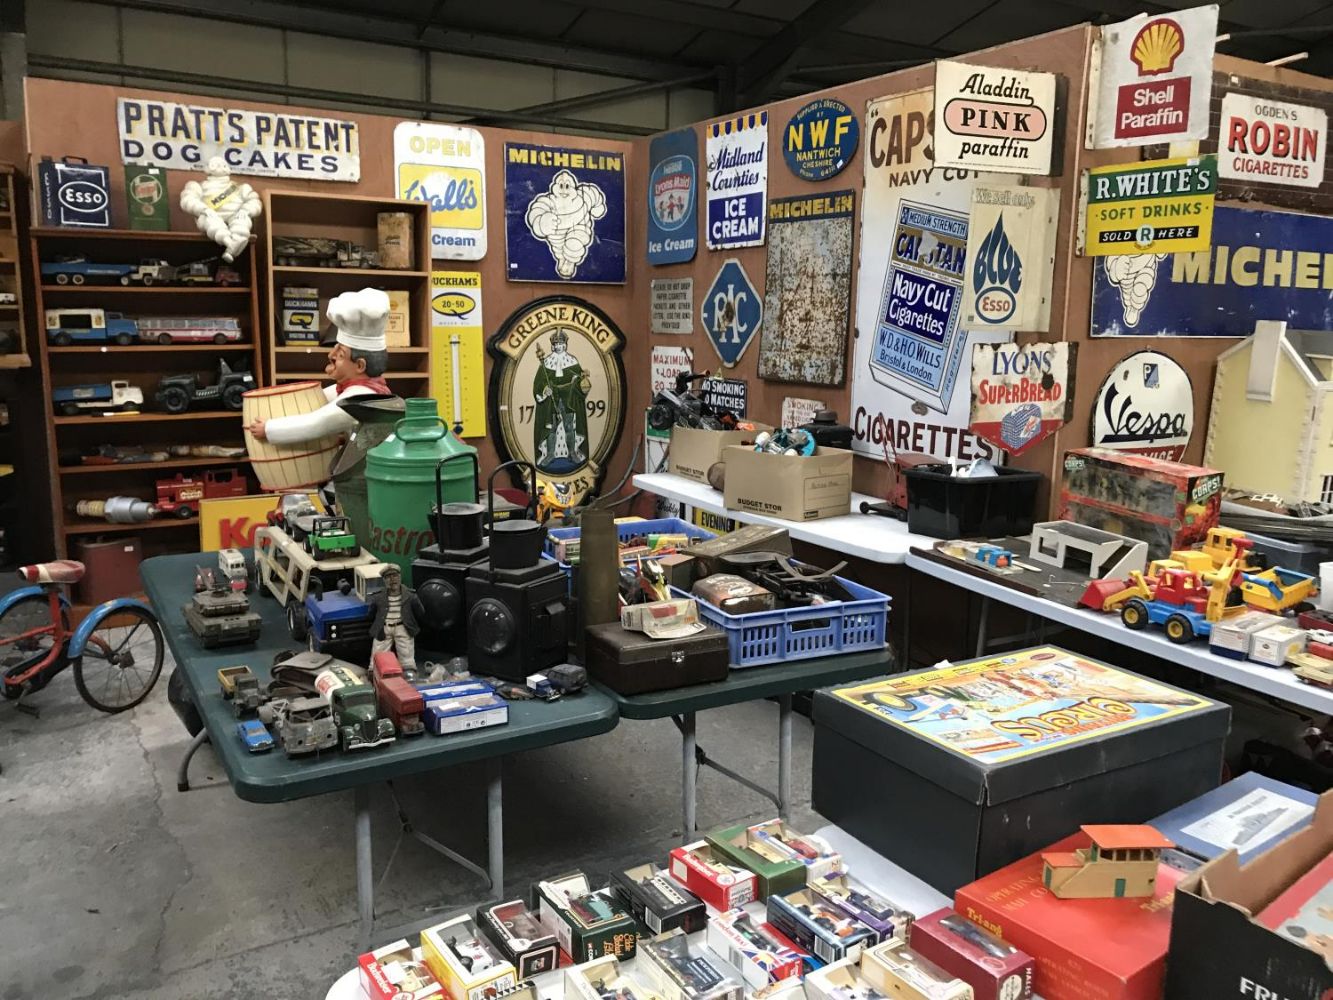 TWO DAY AUCTION OF COLLECTABLES, ANTIQUES, JEWELLERY, FURNITURE, VINTAGE ITEMS, TOOLS ETC. INCLUDING A SPECIAL SALE OF COINS AND STAMPS